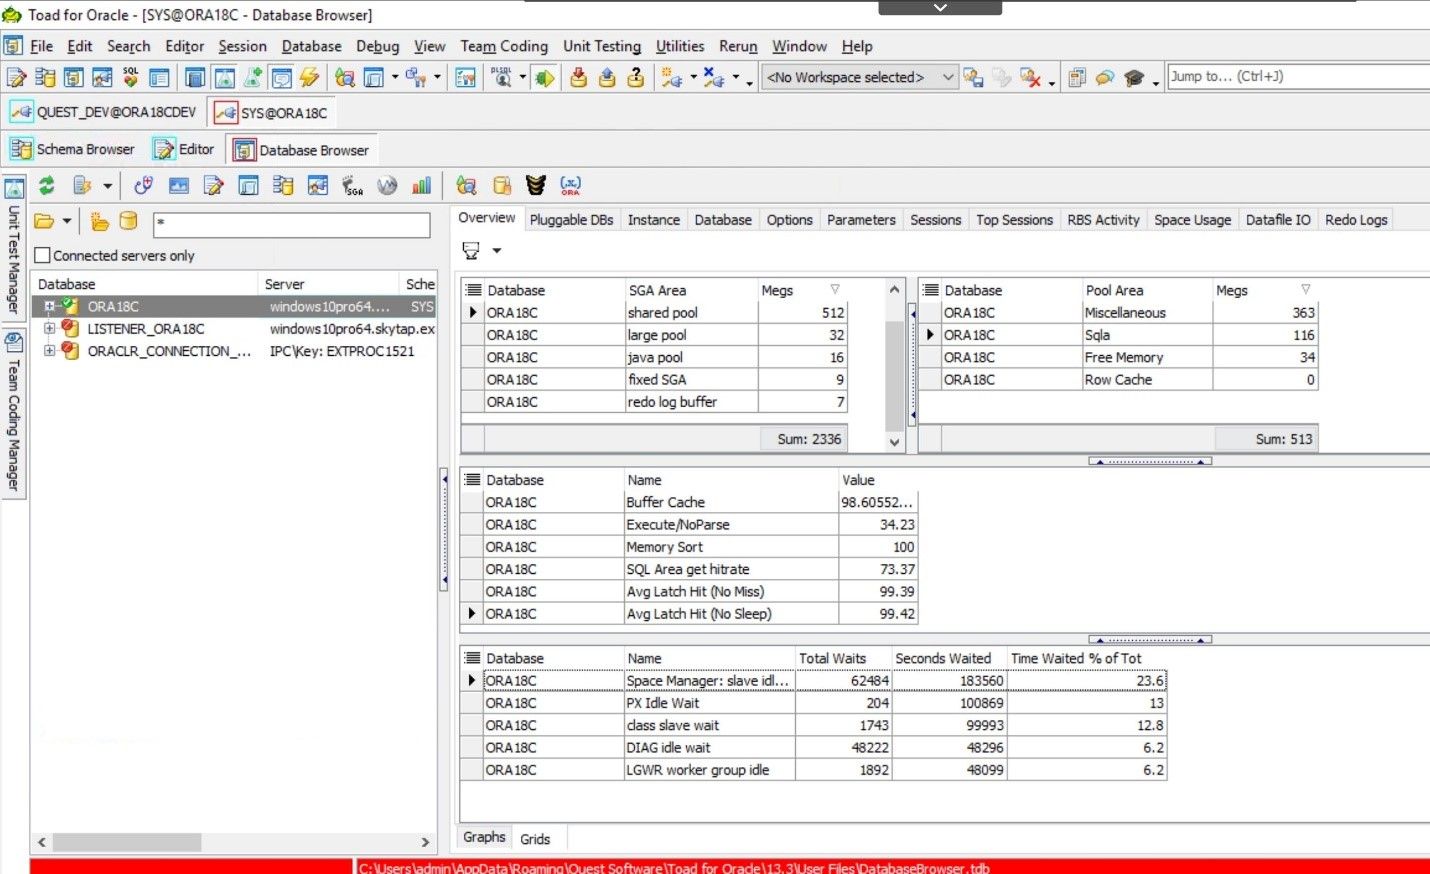 Toad for Oracle. Database Browser showing grid view.